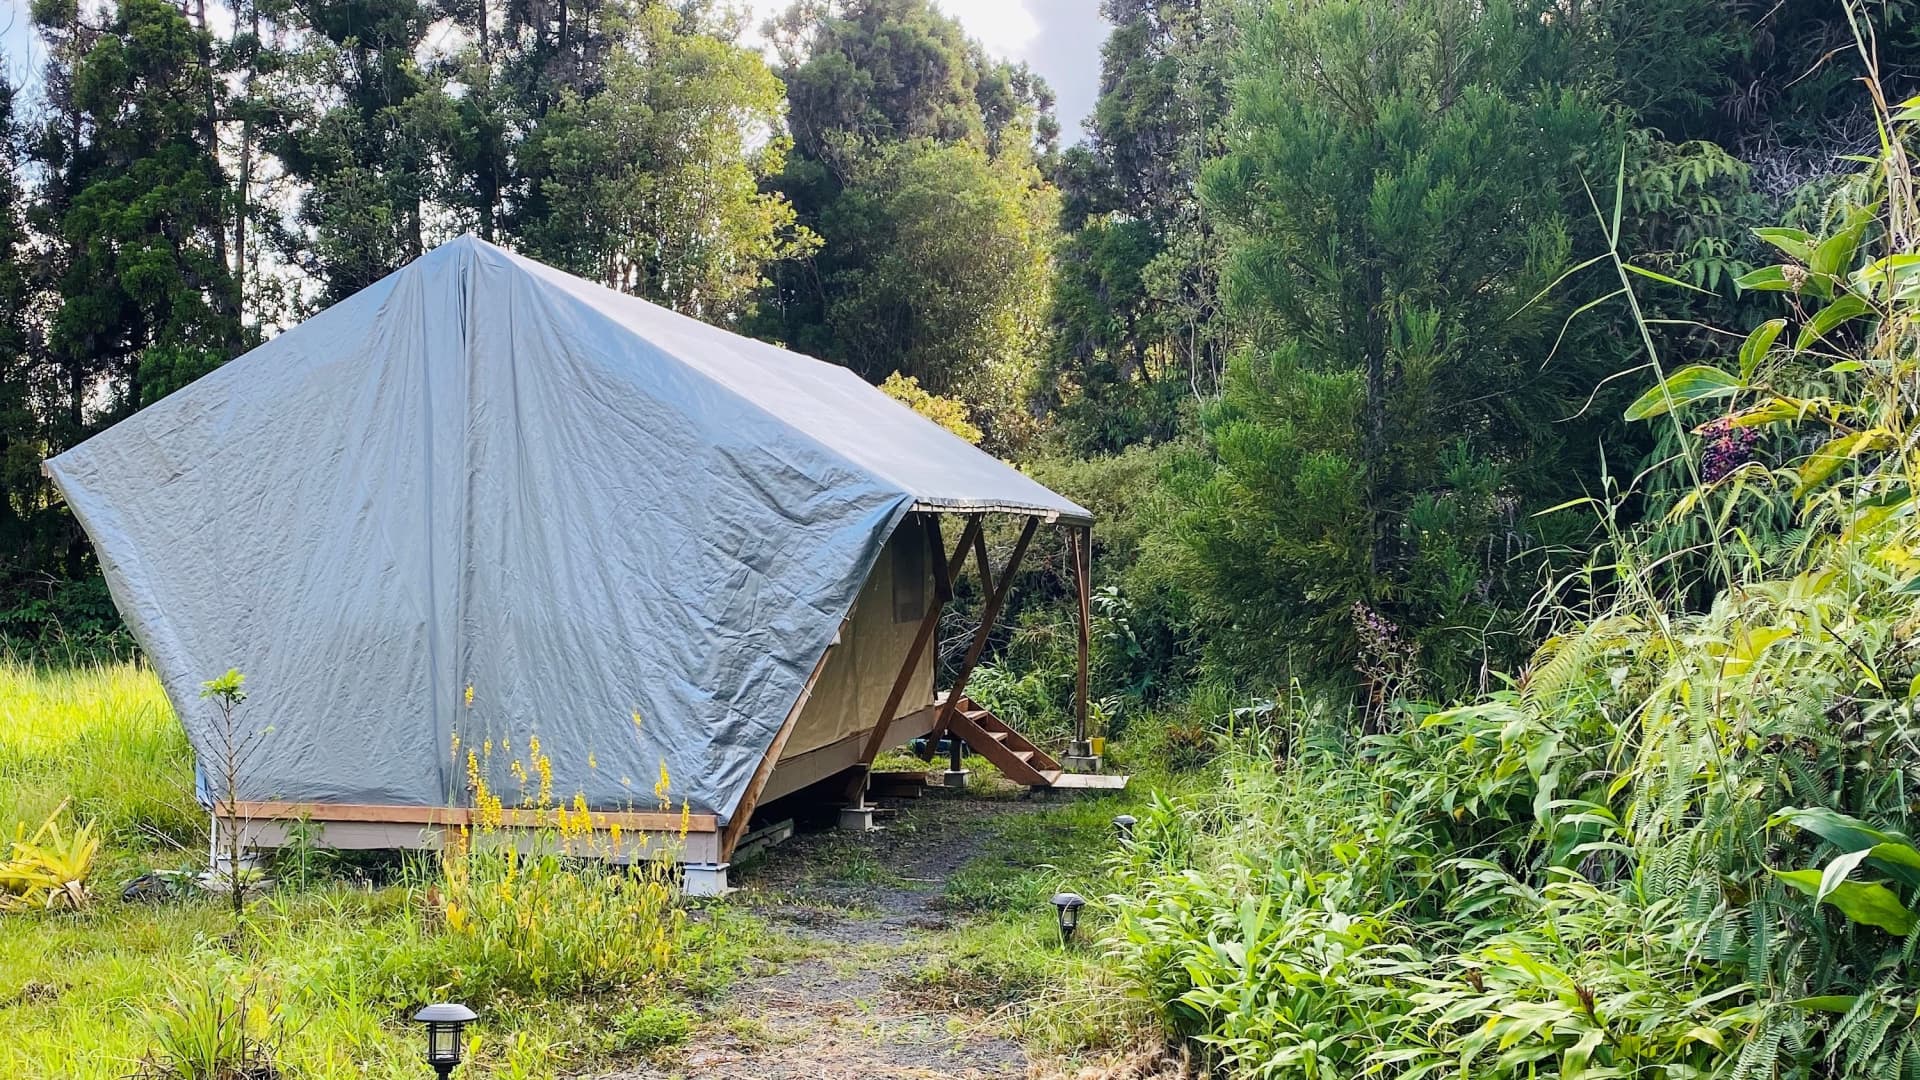 Hall's tucked away glamping tent costs roughly $70 per night and is about 12 miles away from the heart of Hawaii Volcanoes National Park.